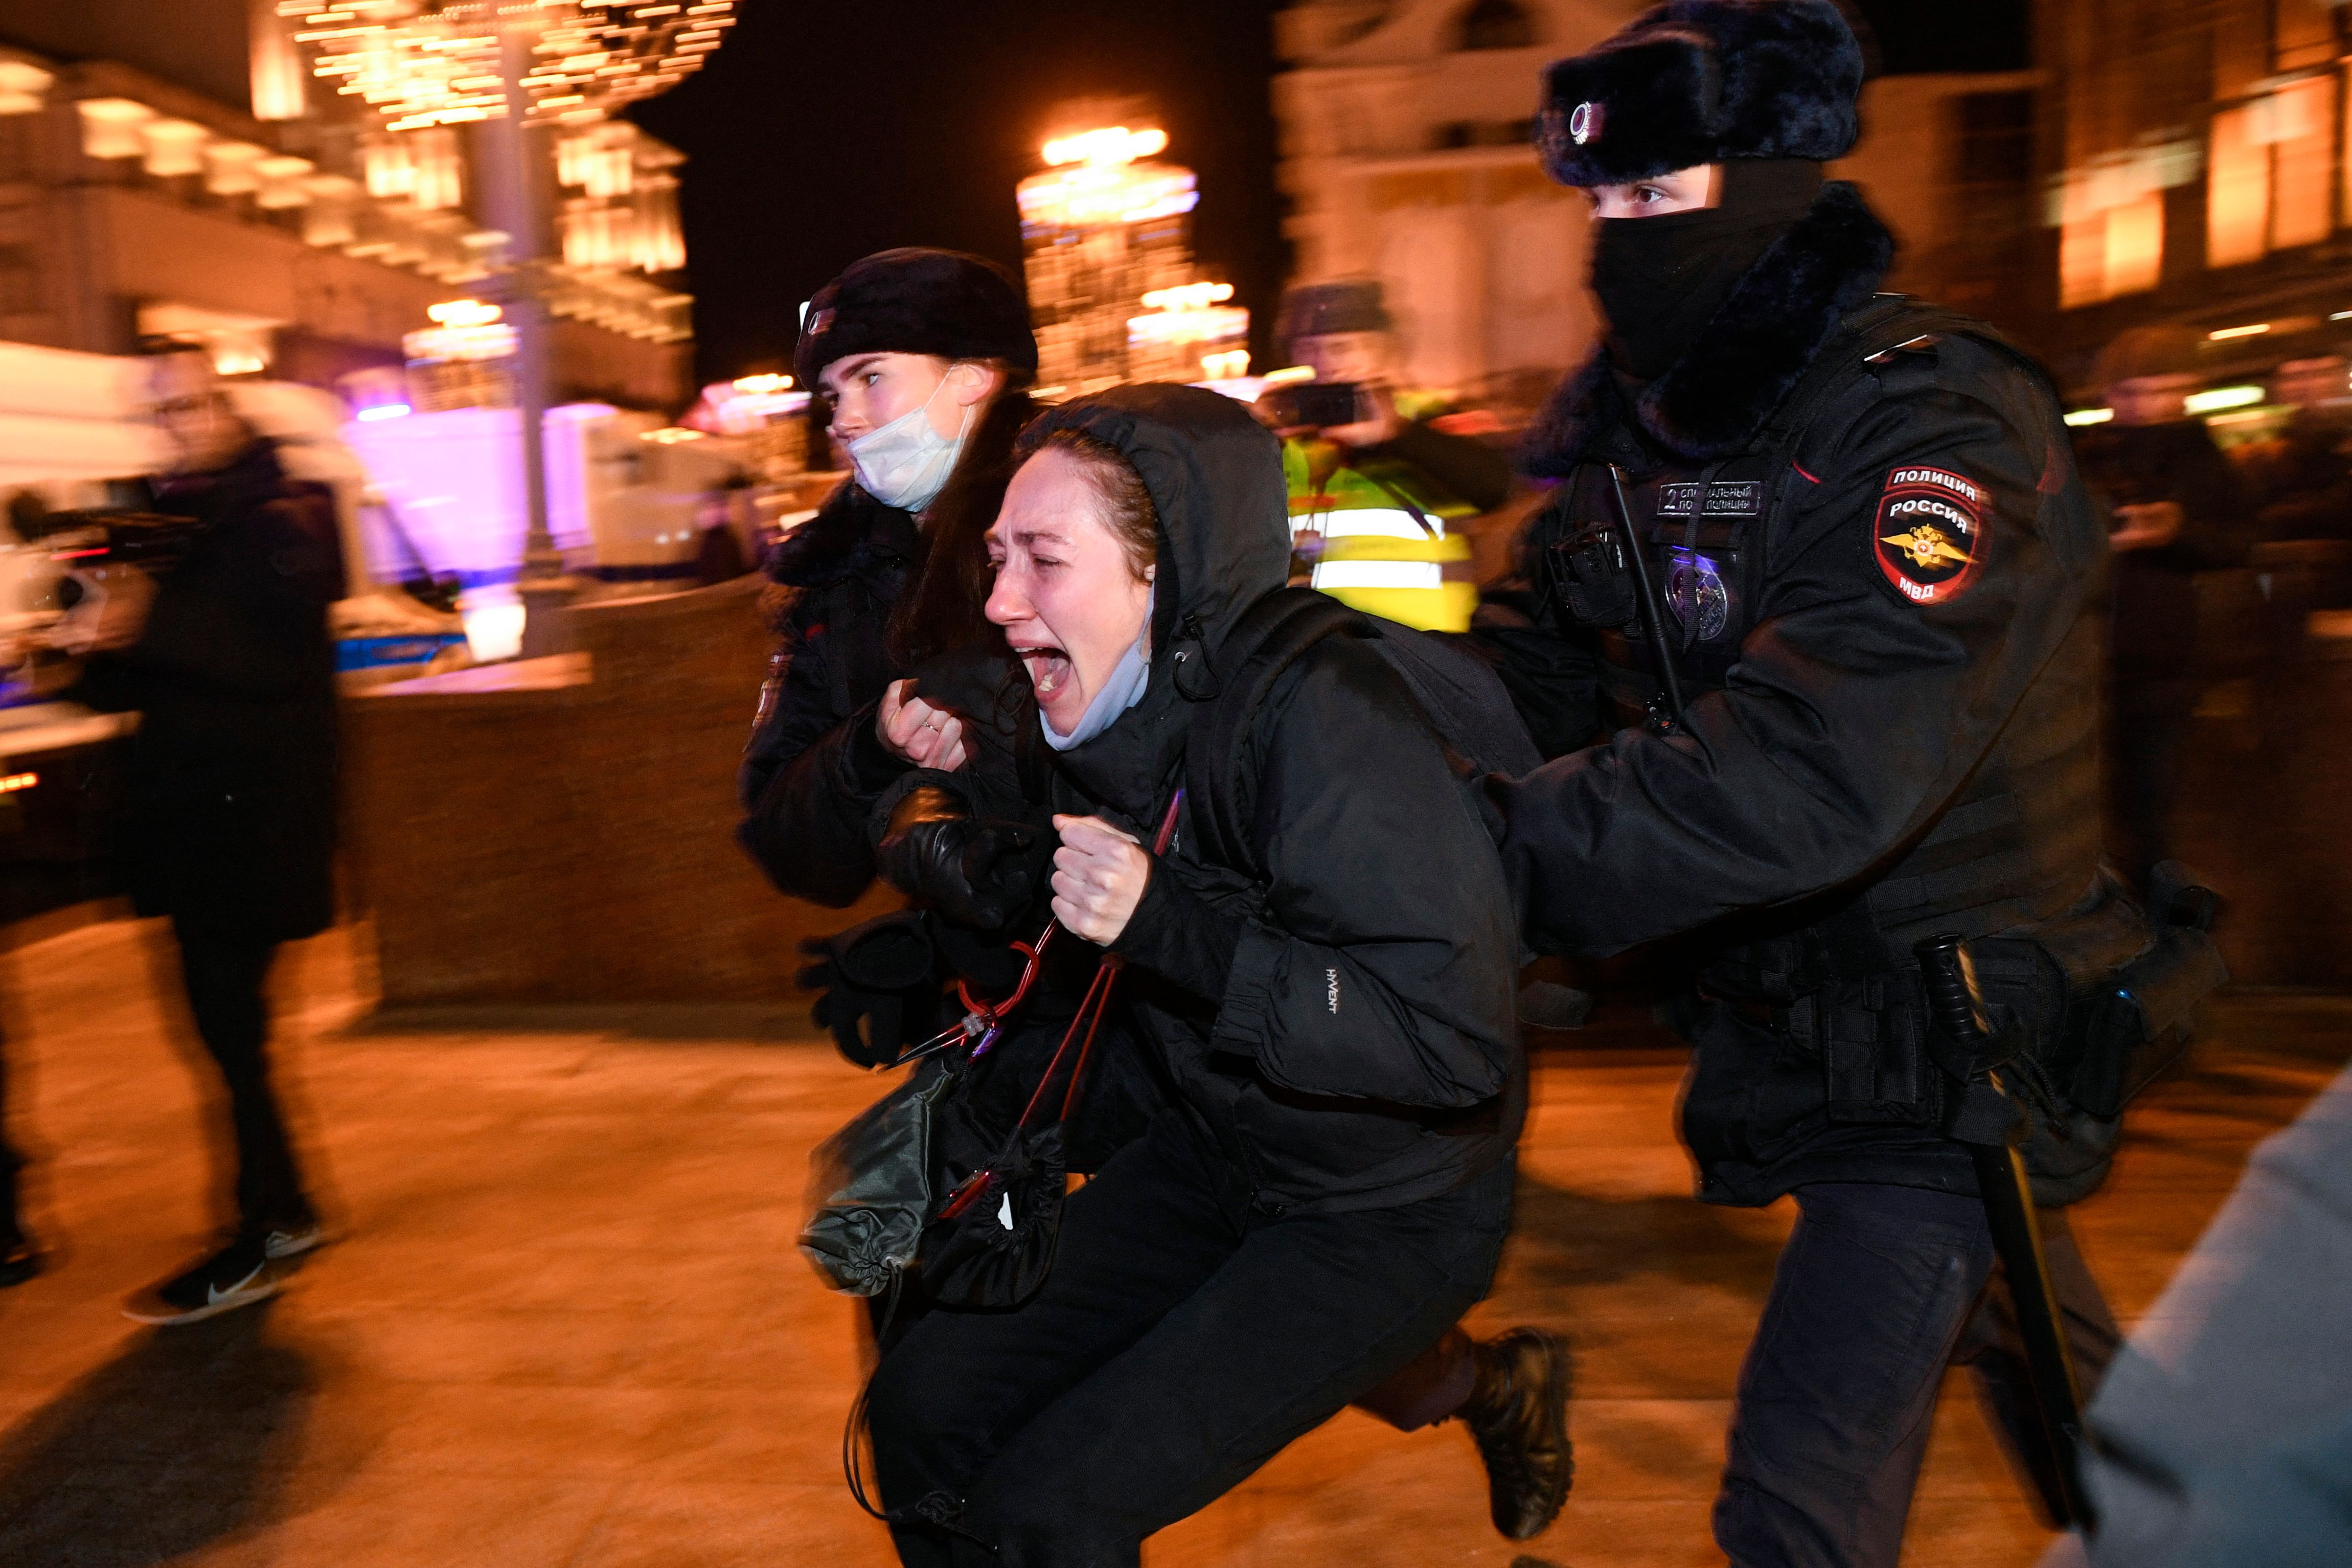 Police officers detain a demonstrator during a protest against Russia's invasion of Ukraine in Moscow on February 24.